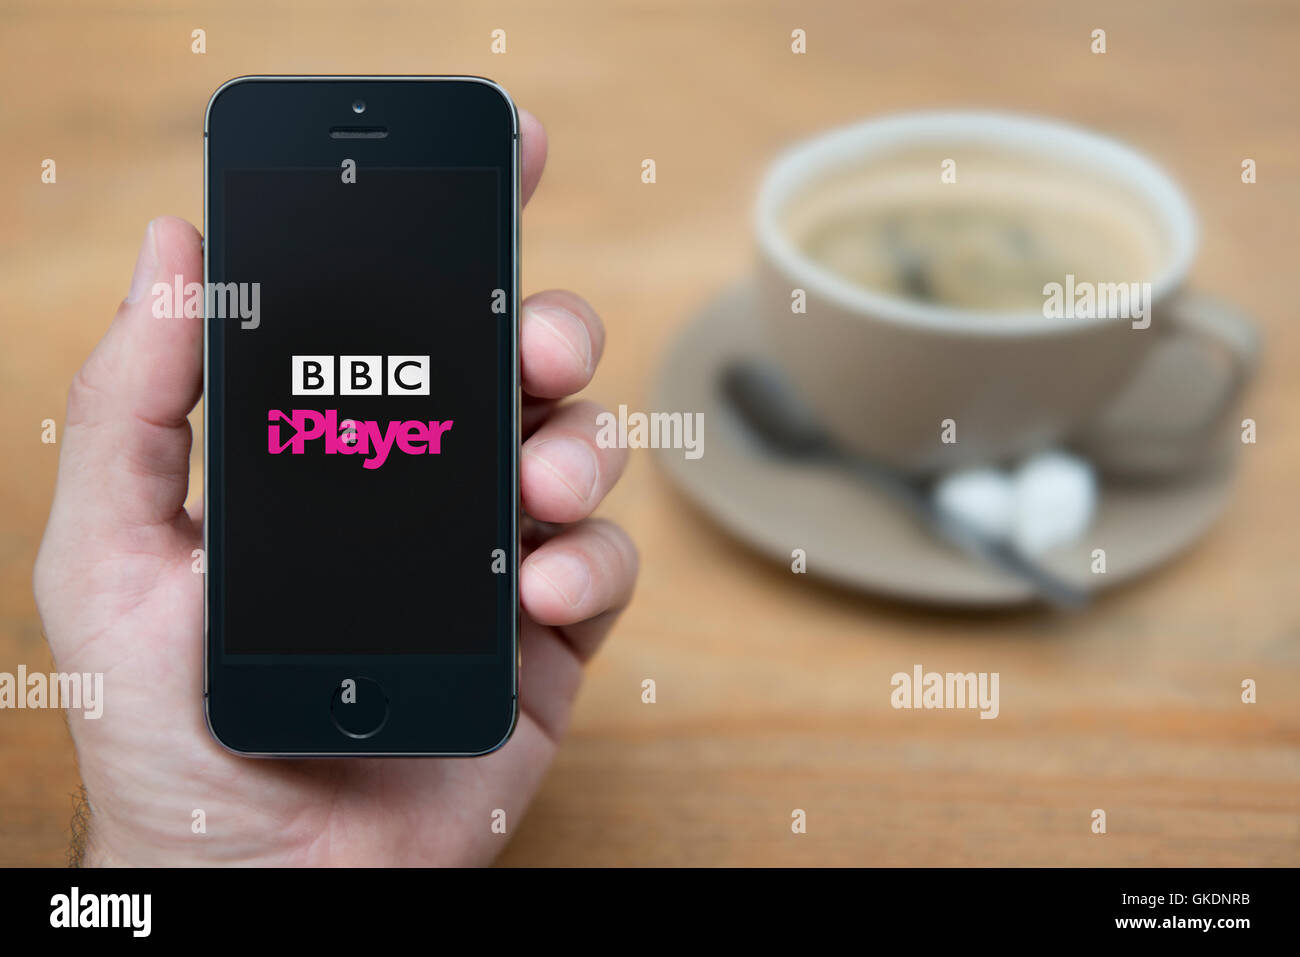 A man looks at his iPhone which displays the BBC iPlayer logo, while sat with a cup of coffee (Editorial use only). Stock Photo